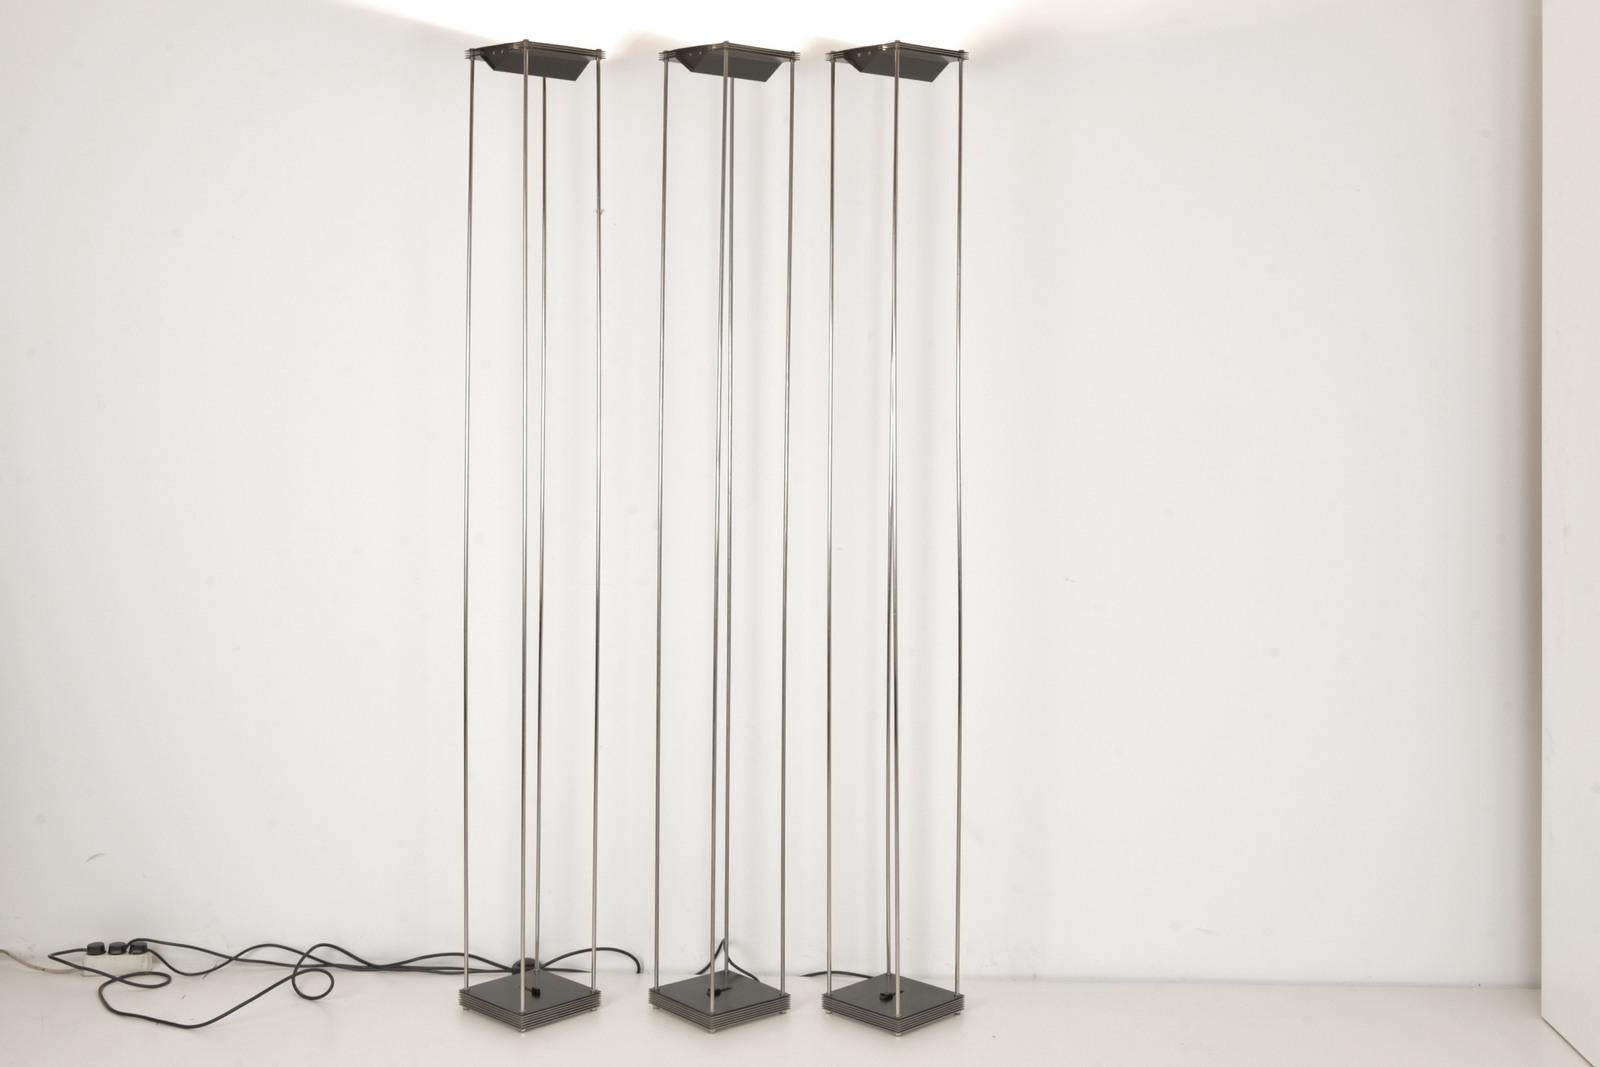 Late 20th Century 1 of 3 Floor Lamps Basis by Jean Marc da Costa for SERIEN, Germany - 1984 For Sale